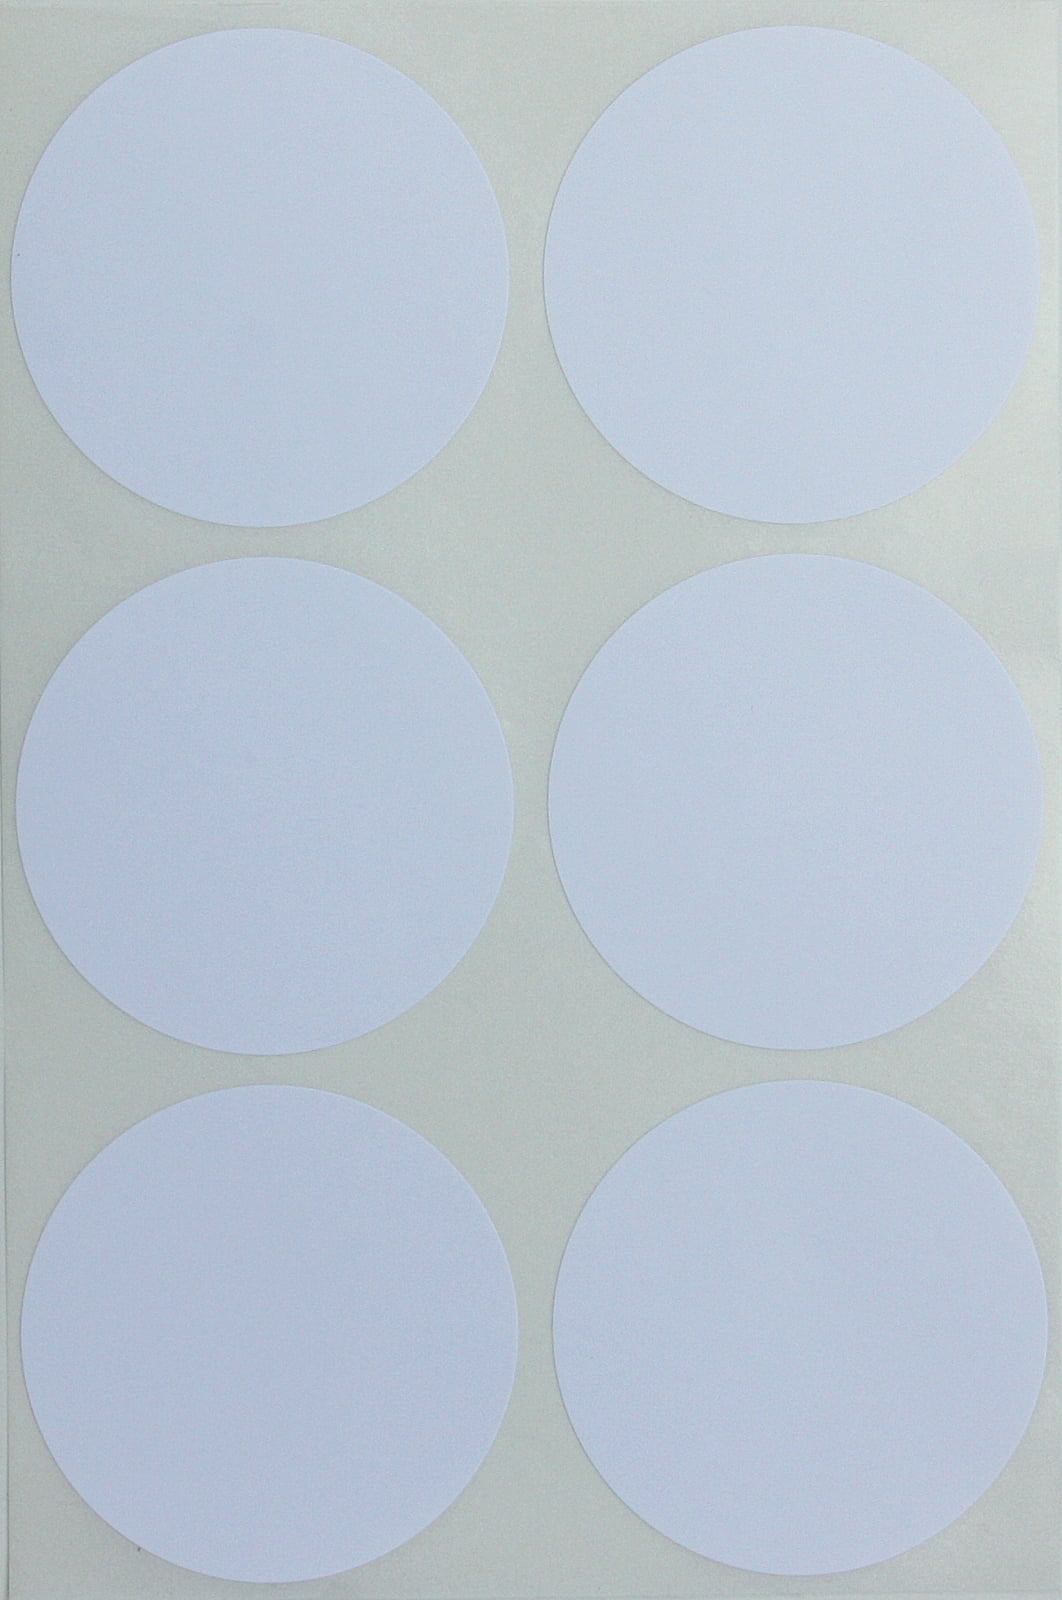 300 Light Blue 45mm 1 3/4 Inch Colour Code Dots Round Stickers Sticky ID Labels 